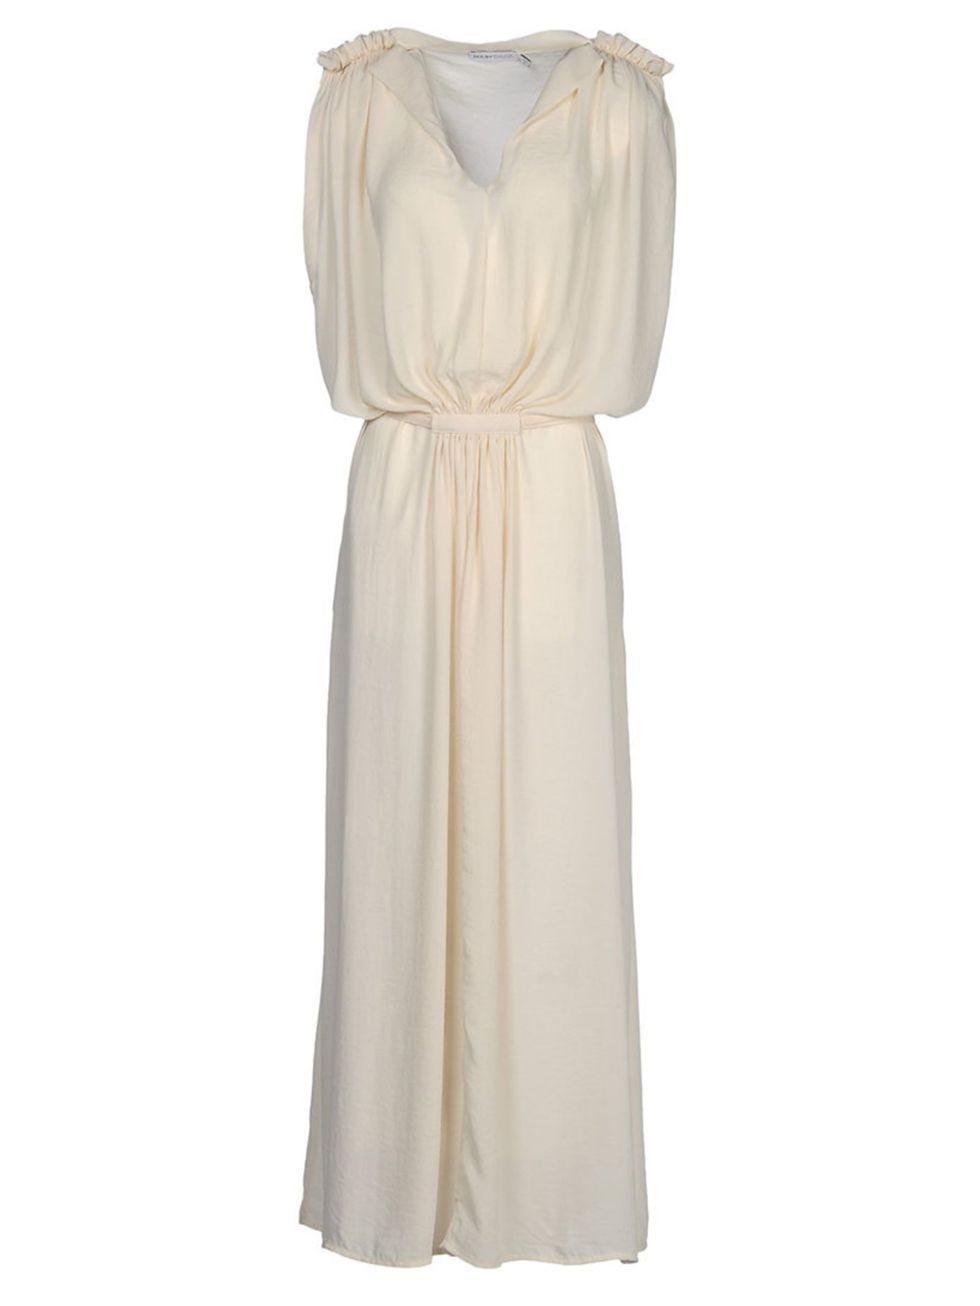 <p>Long dress, See by Chloe at <a href="http://www.yoox.com/uk/women">Yoox</a>, was £281, now £250.</p>